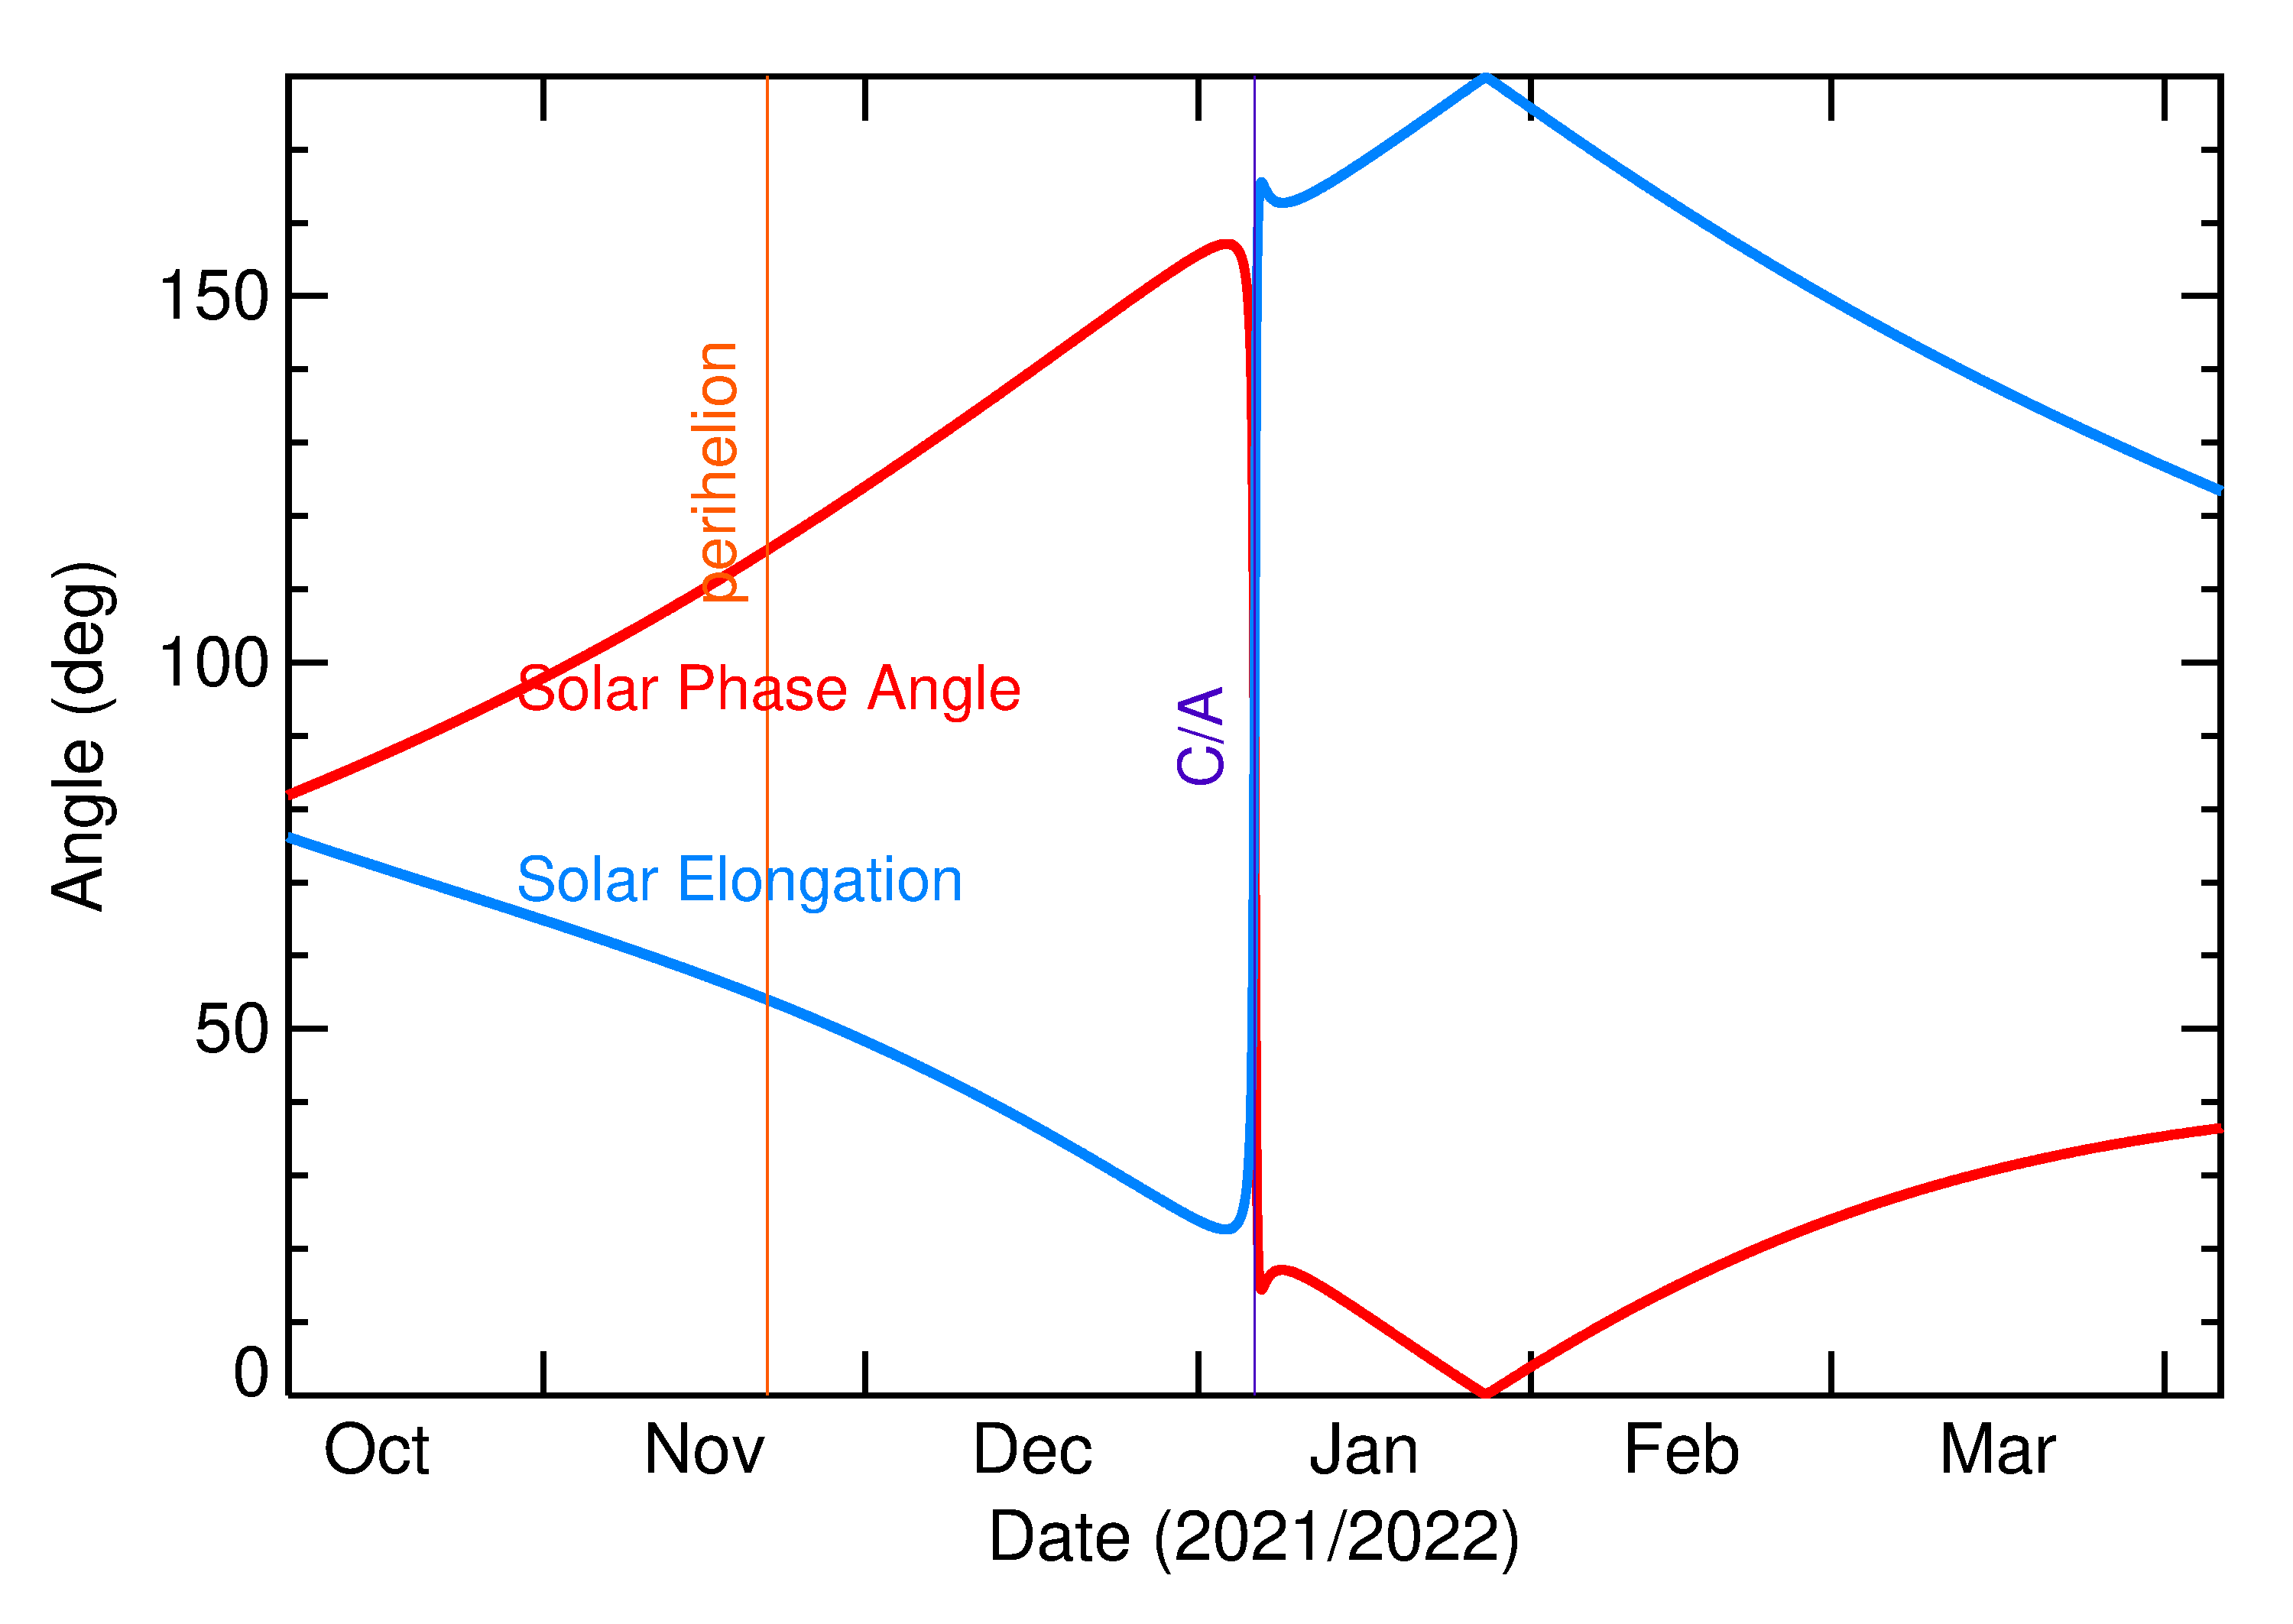 Solar Elongation and Solar Phase Angle of 2022 AV13 in the months around closest approach